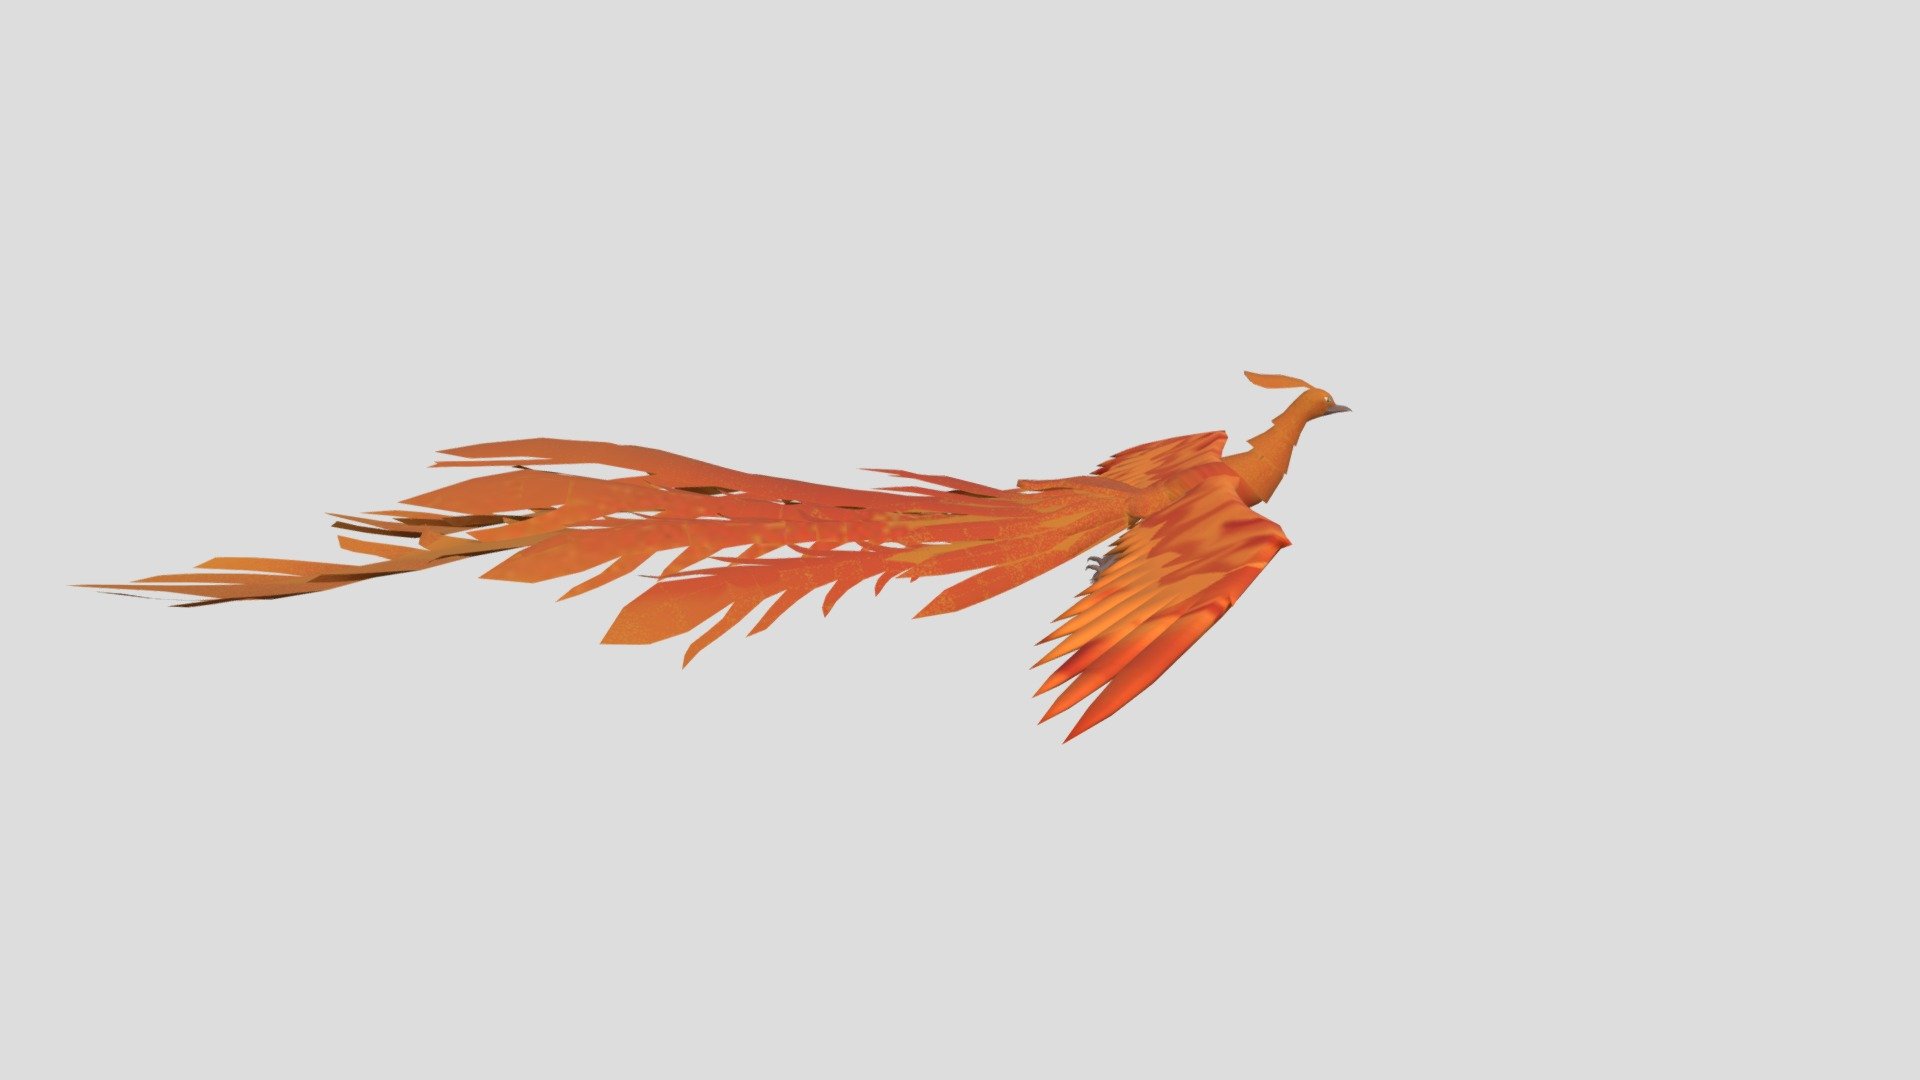 3D Model of Phoenix.
Phoenixes are amongst the strongest and most durable of supernatural creatures 3d model